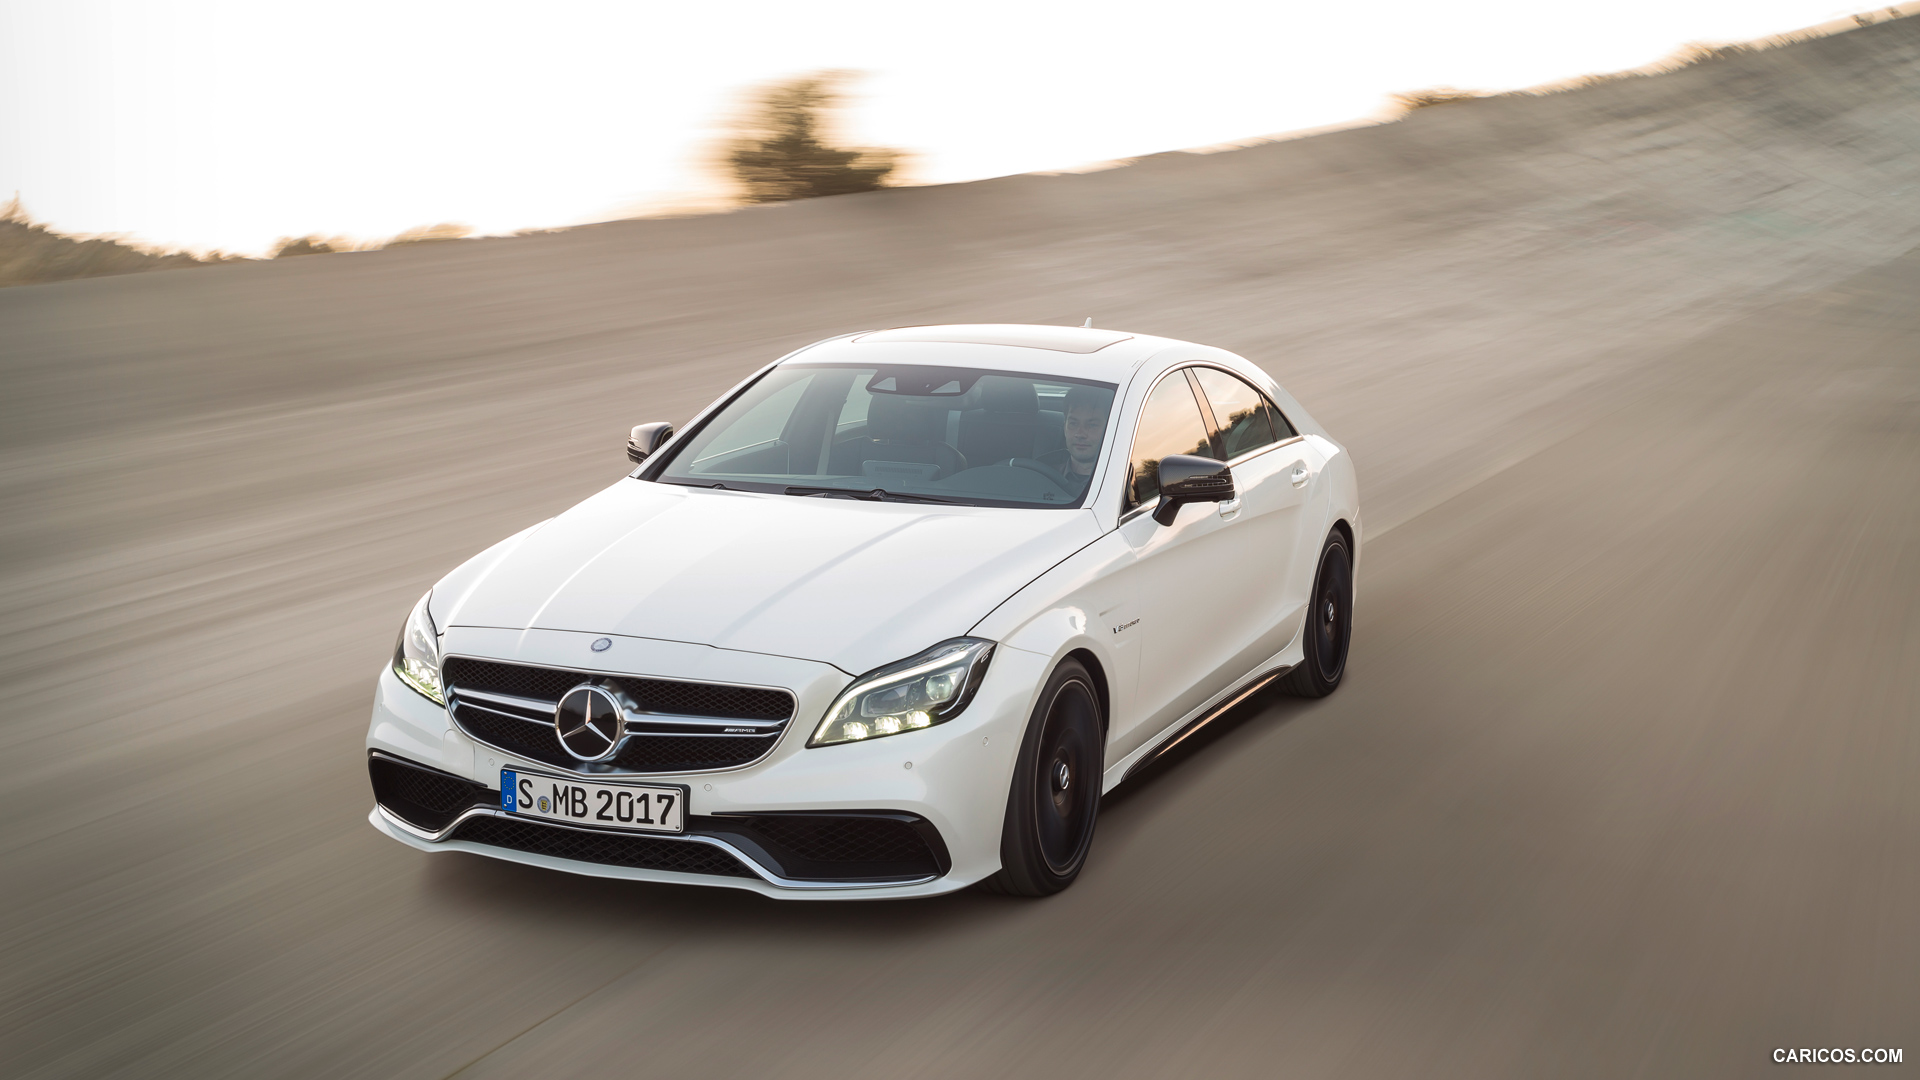 2015 Mercedes-Benz CLS 63 AMG S-Model - Front, #20 of 51